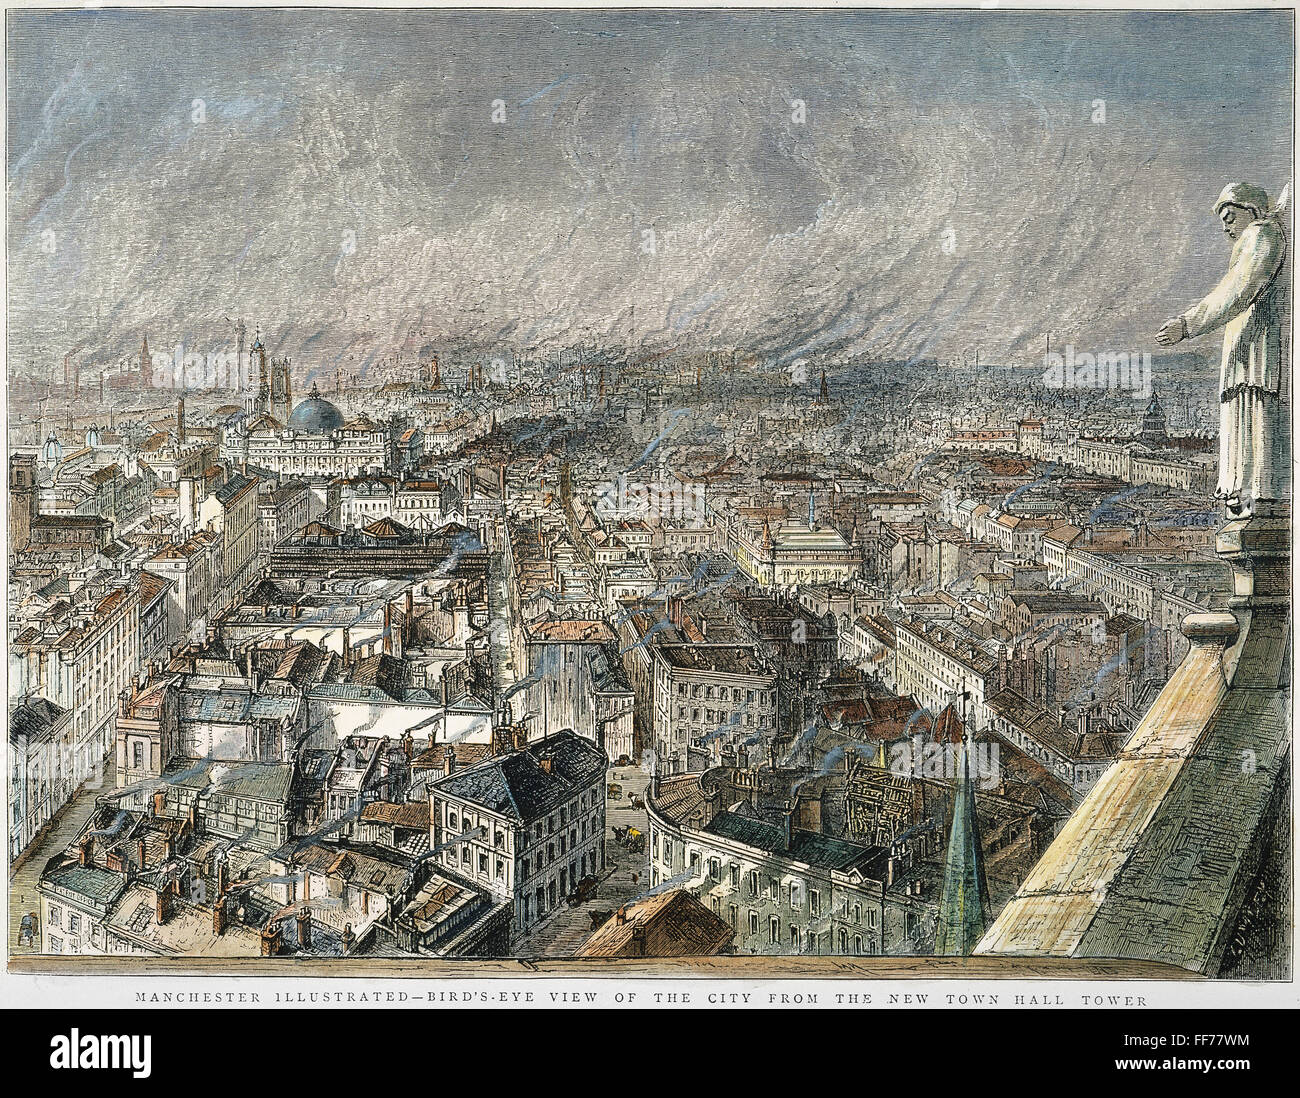 MANCHESTER, Inghilterra, 1876. /NA vista panoramica della città di Manchester, Inghilterra, durante la Rivoluzione Industriale inglese incisione, 1876. Foto Stock